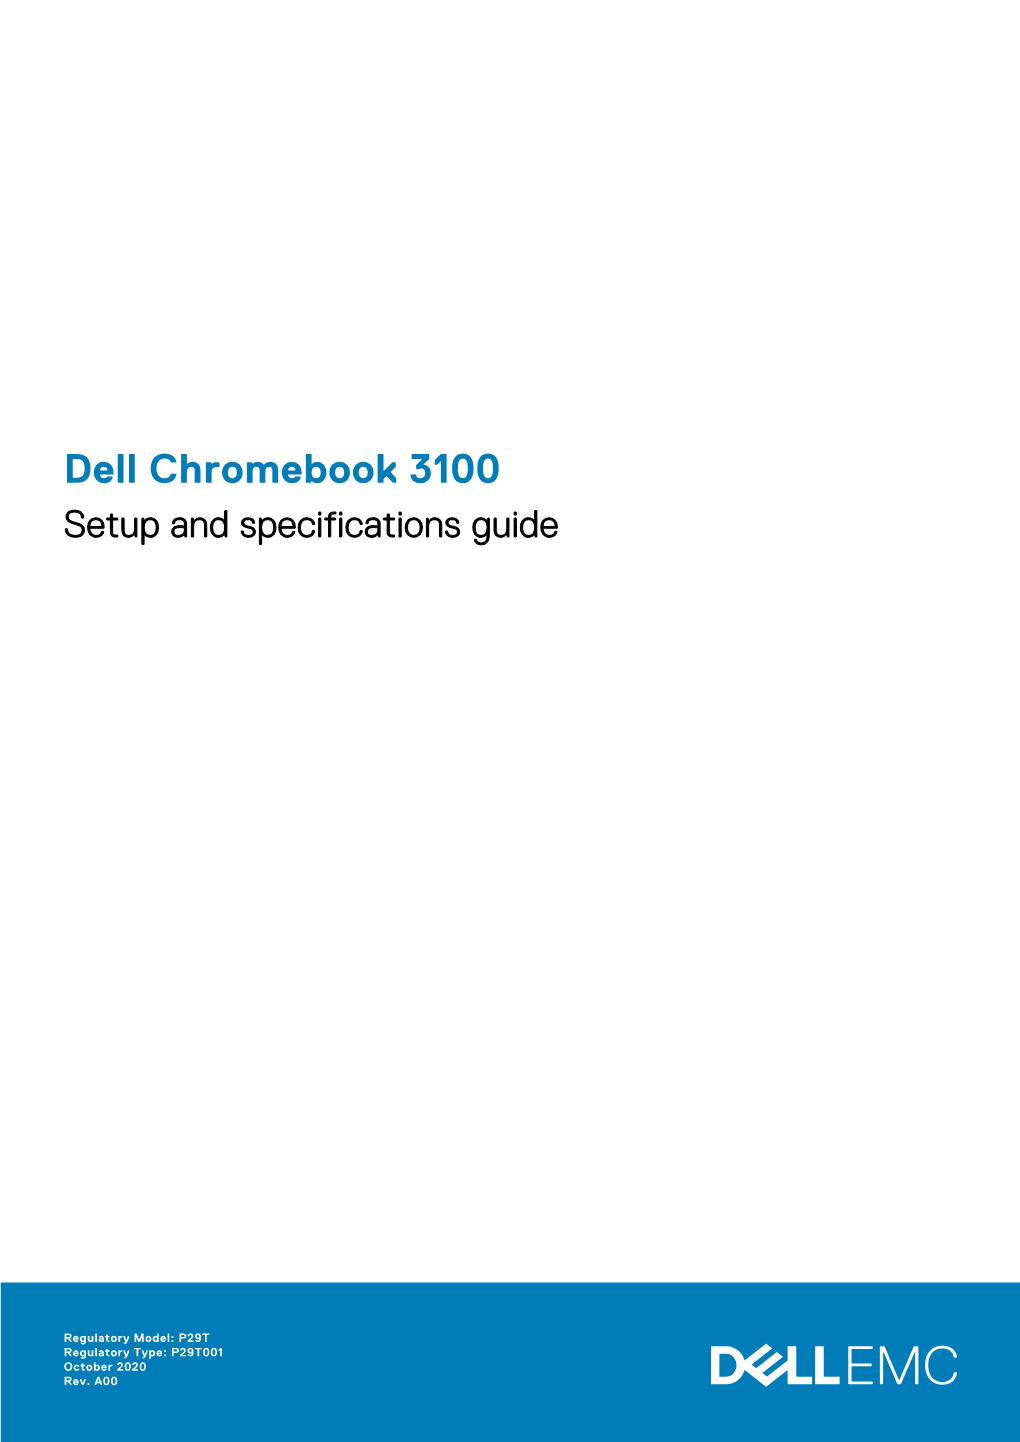 Dell Chromebook 3100 Setup and Specifications Guide